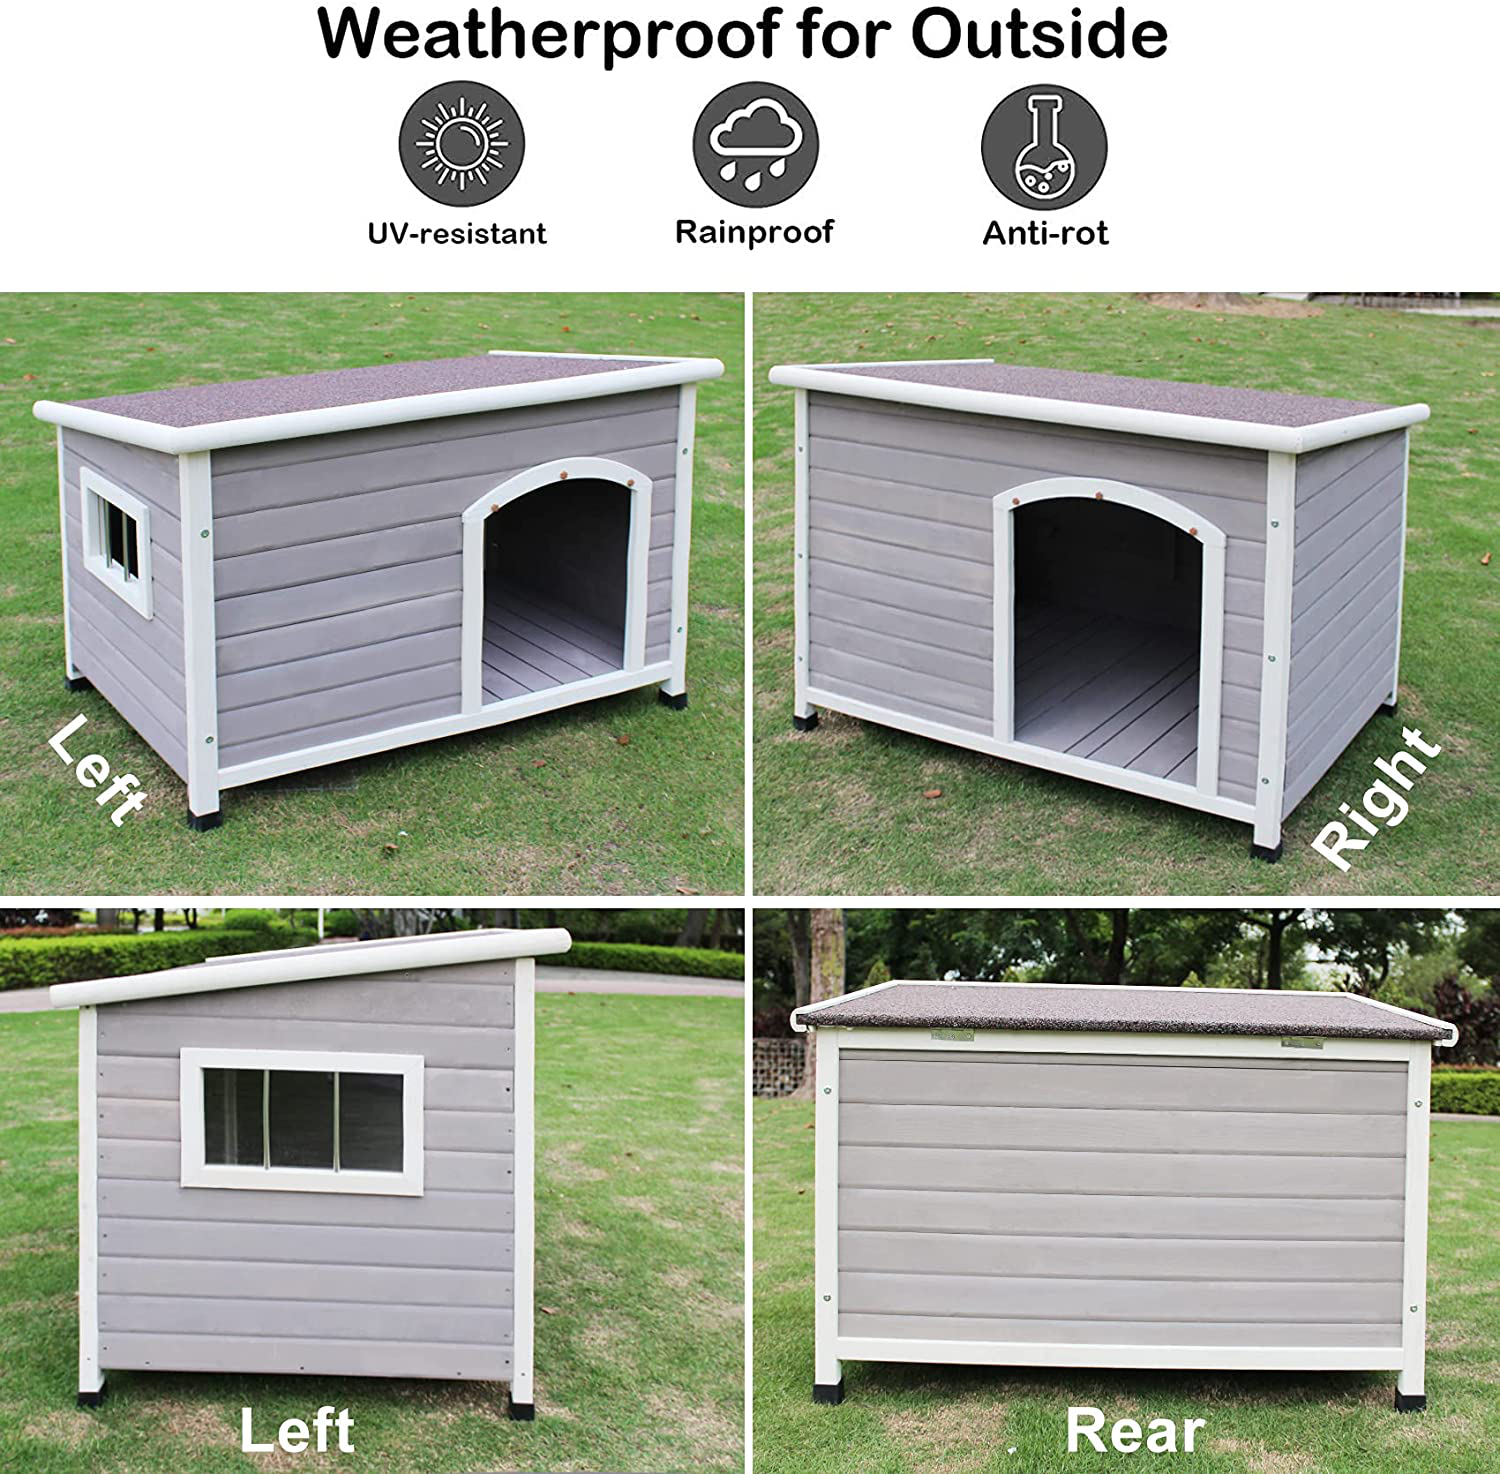 Rockever Wood Dog Houses Outdoor Insulated, Weatherproof Dog Houses outside with Door Cute Wooden